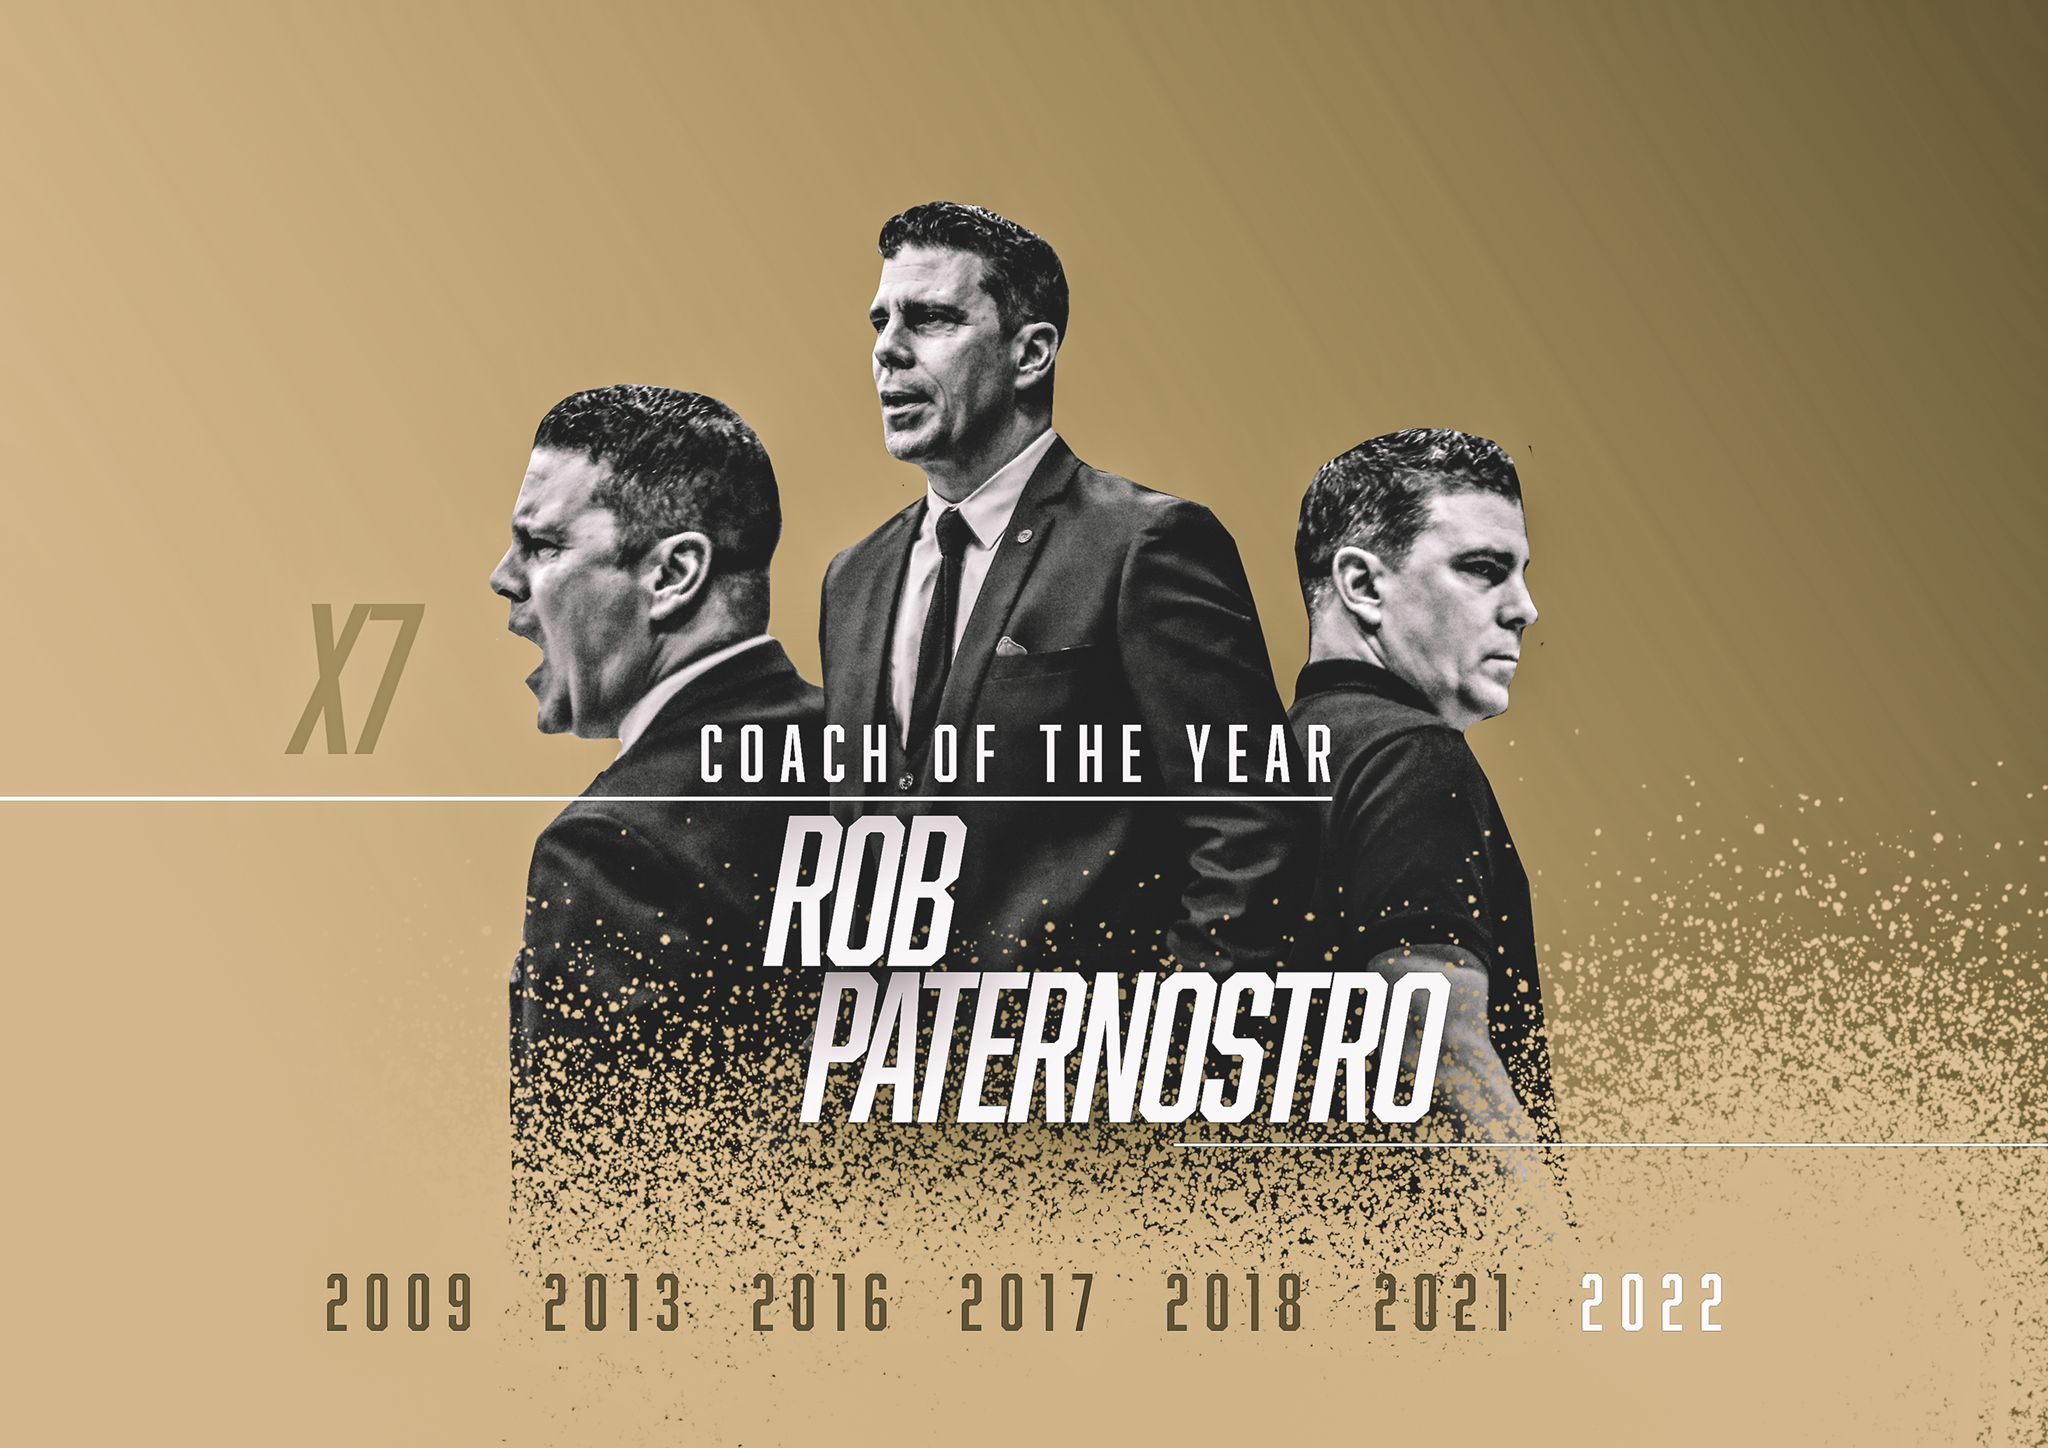 Rob named Coach of the Year!